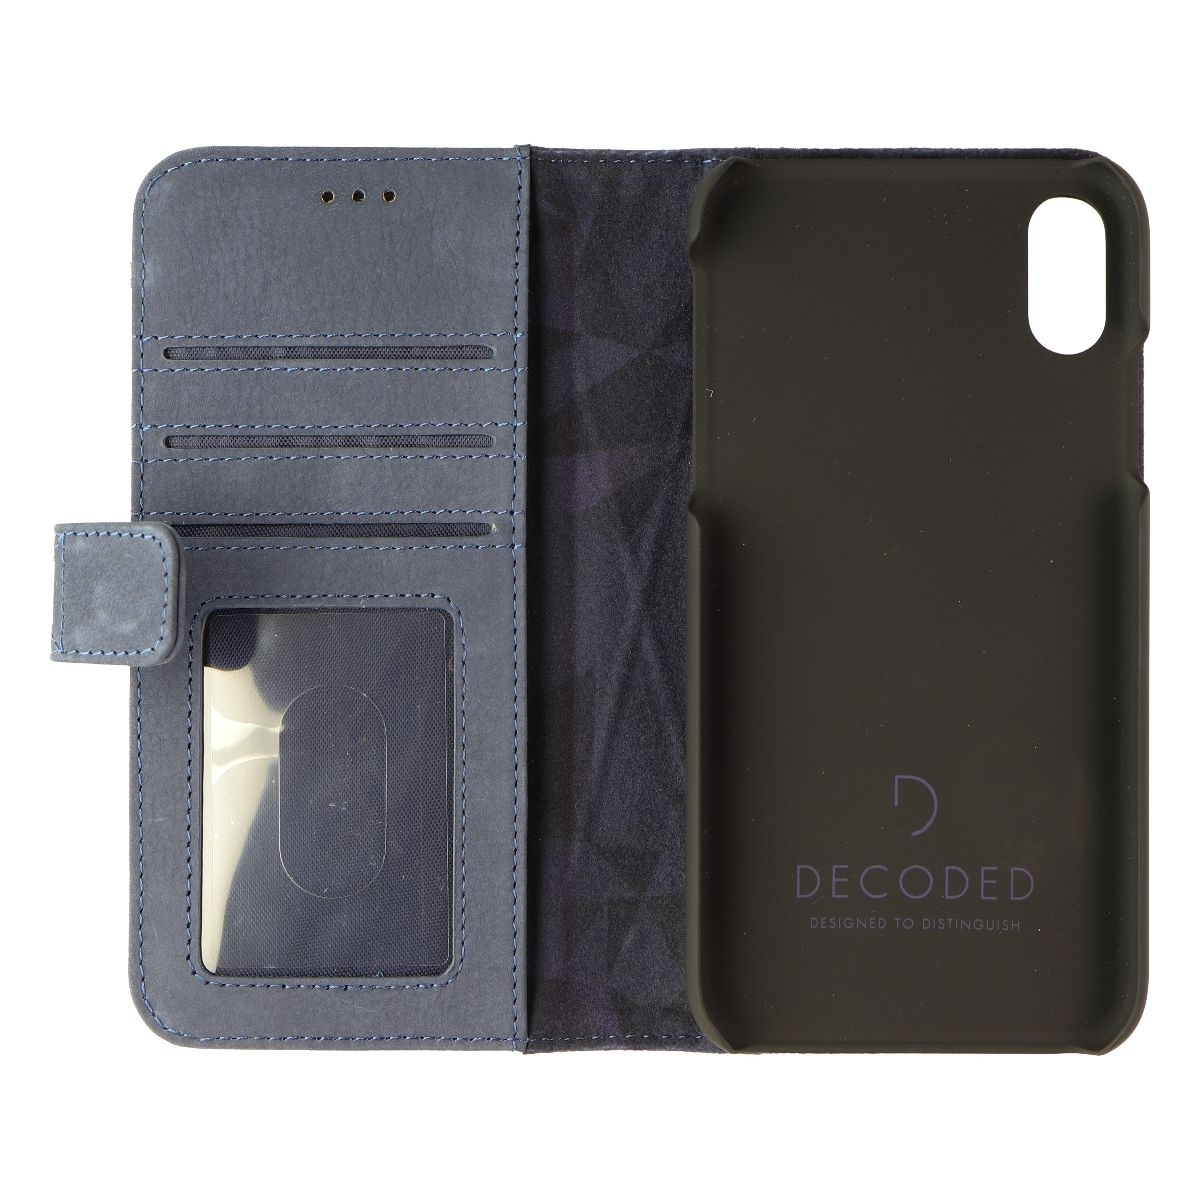 DECODED Full Grain Leather Folio + Case For Apple IPhone XR - Light Blue (Refurbished)